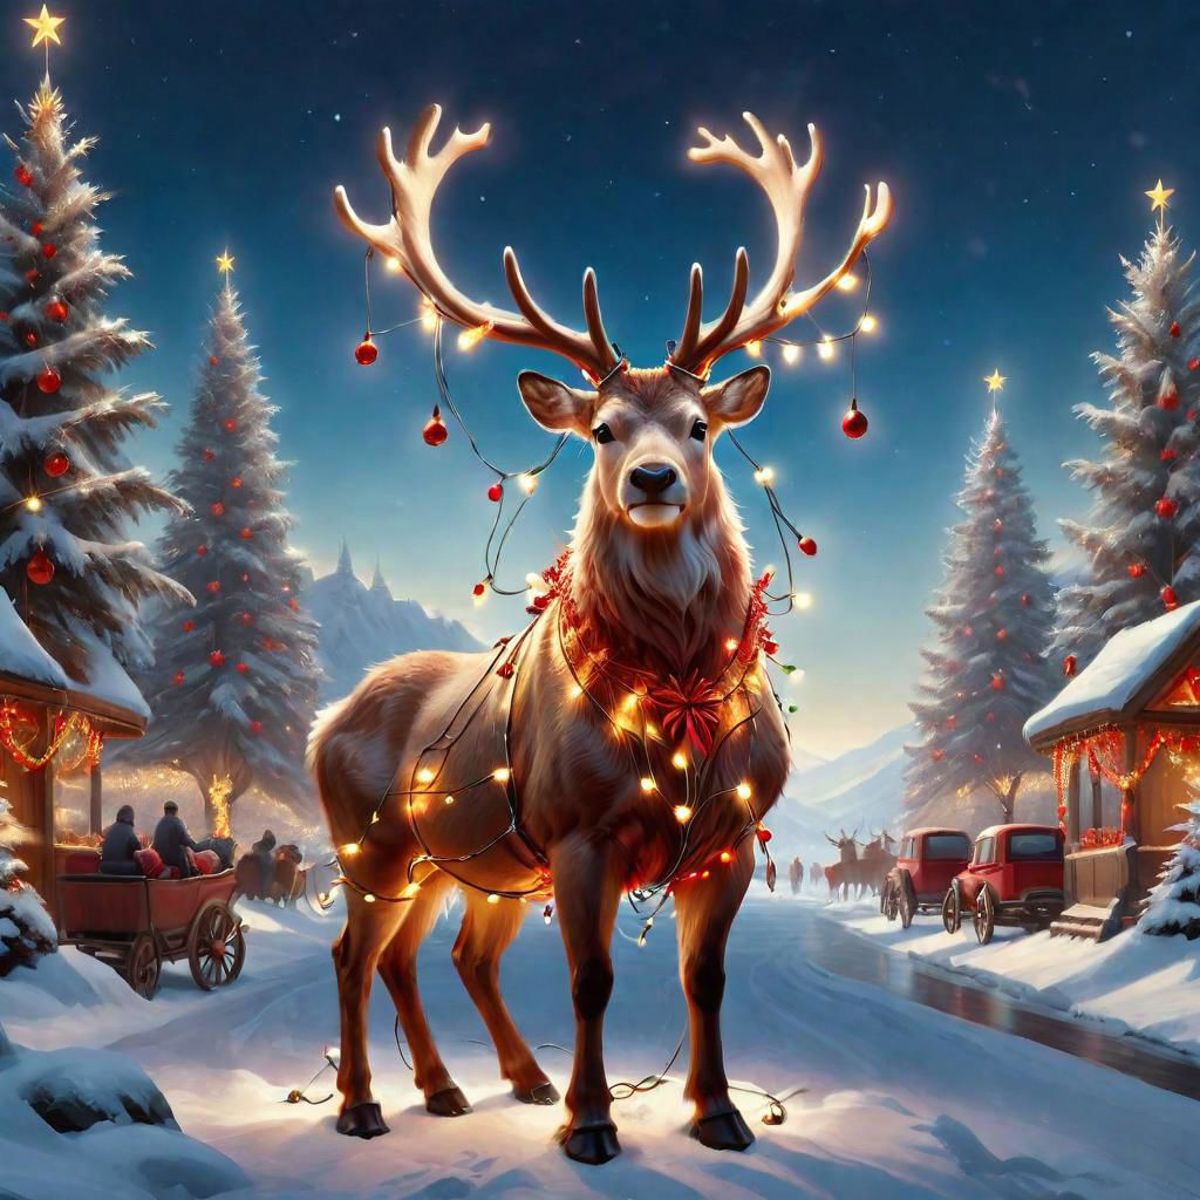 A Christmas scene with a reindeer in the center, surrounded by lit lights and people.